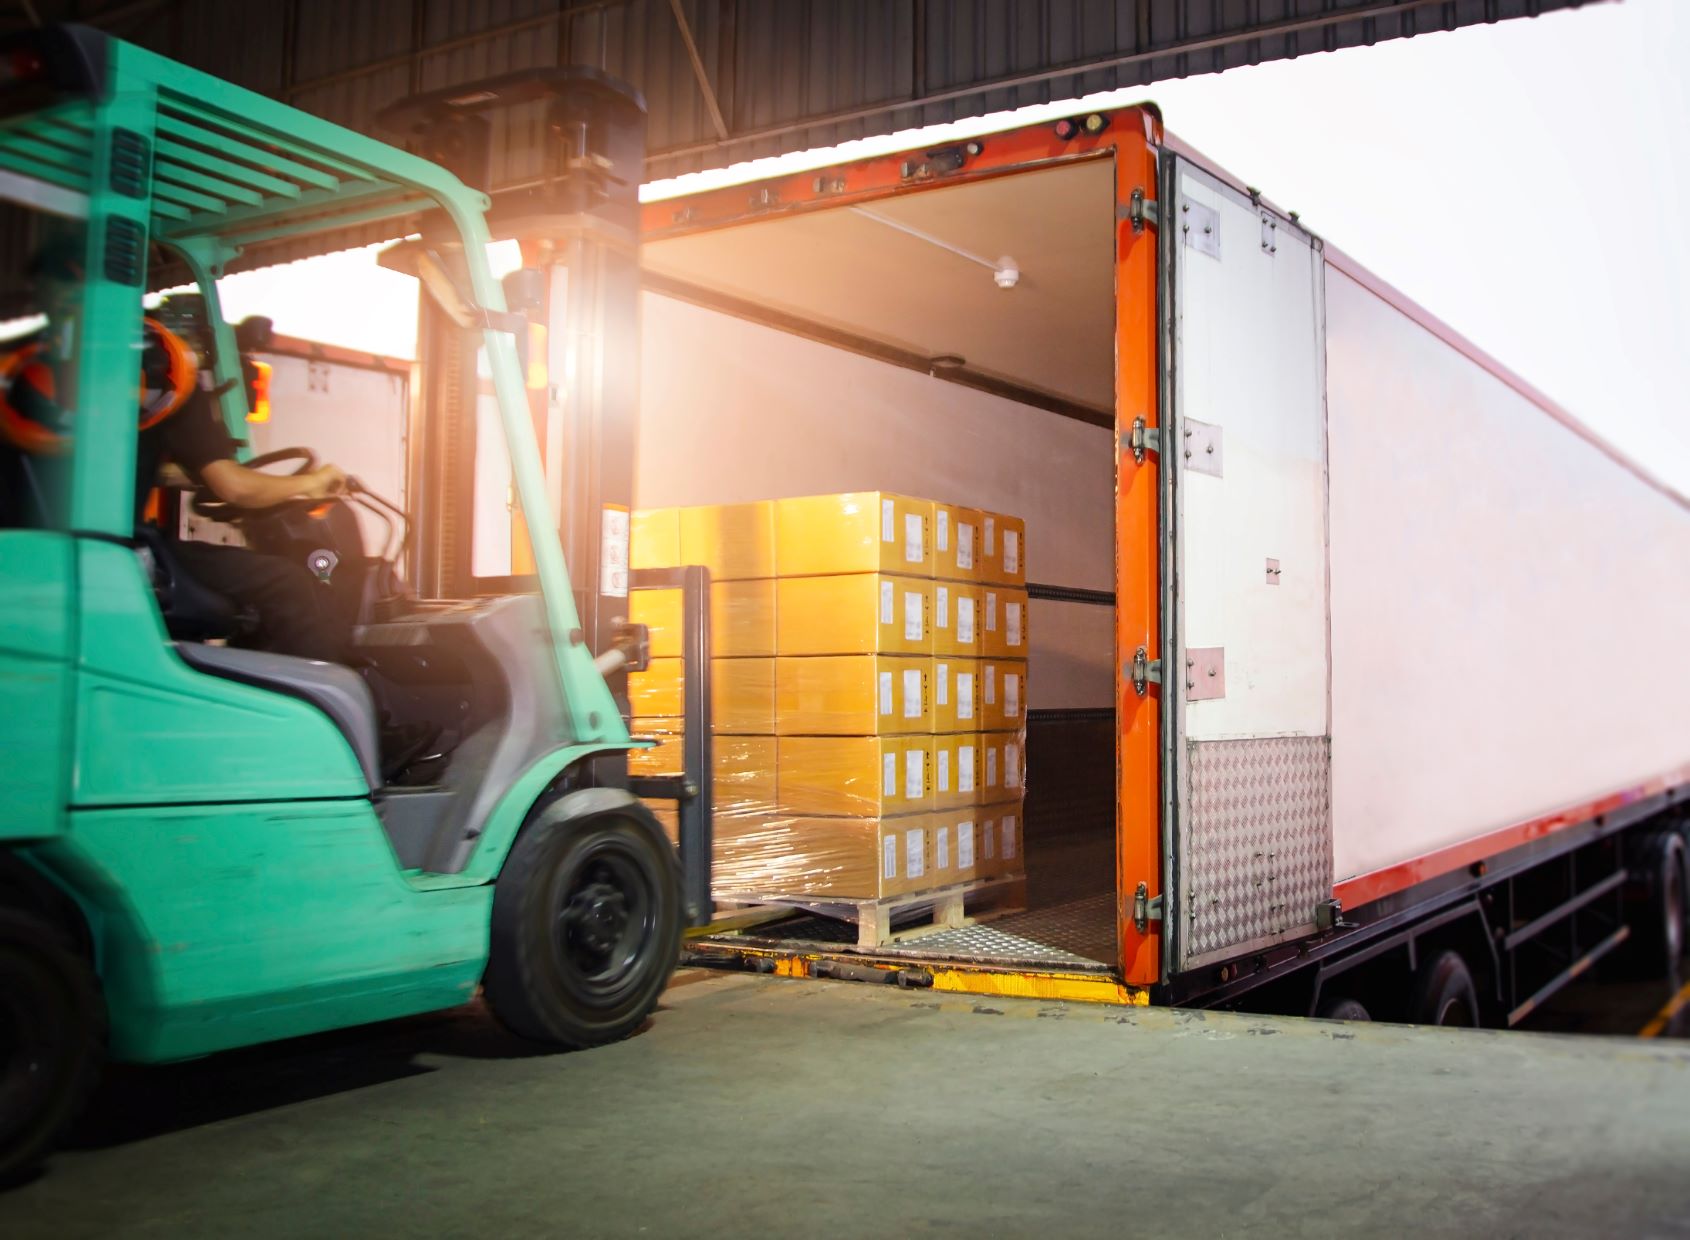 The Importance Of Restraint Systems To Protect Loading Dock Workers